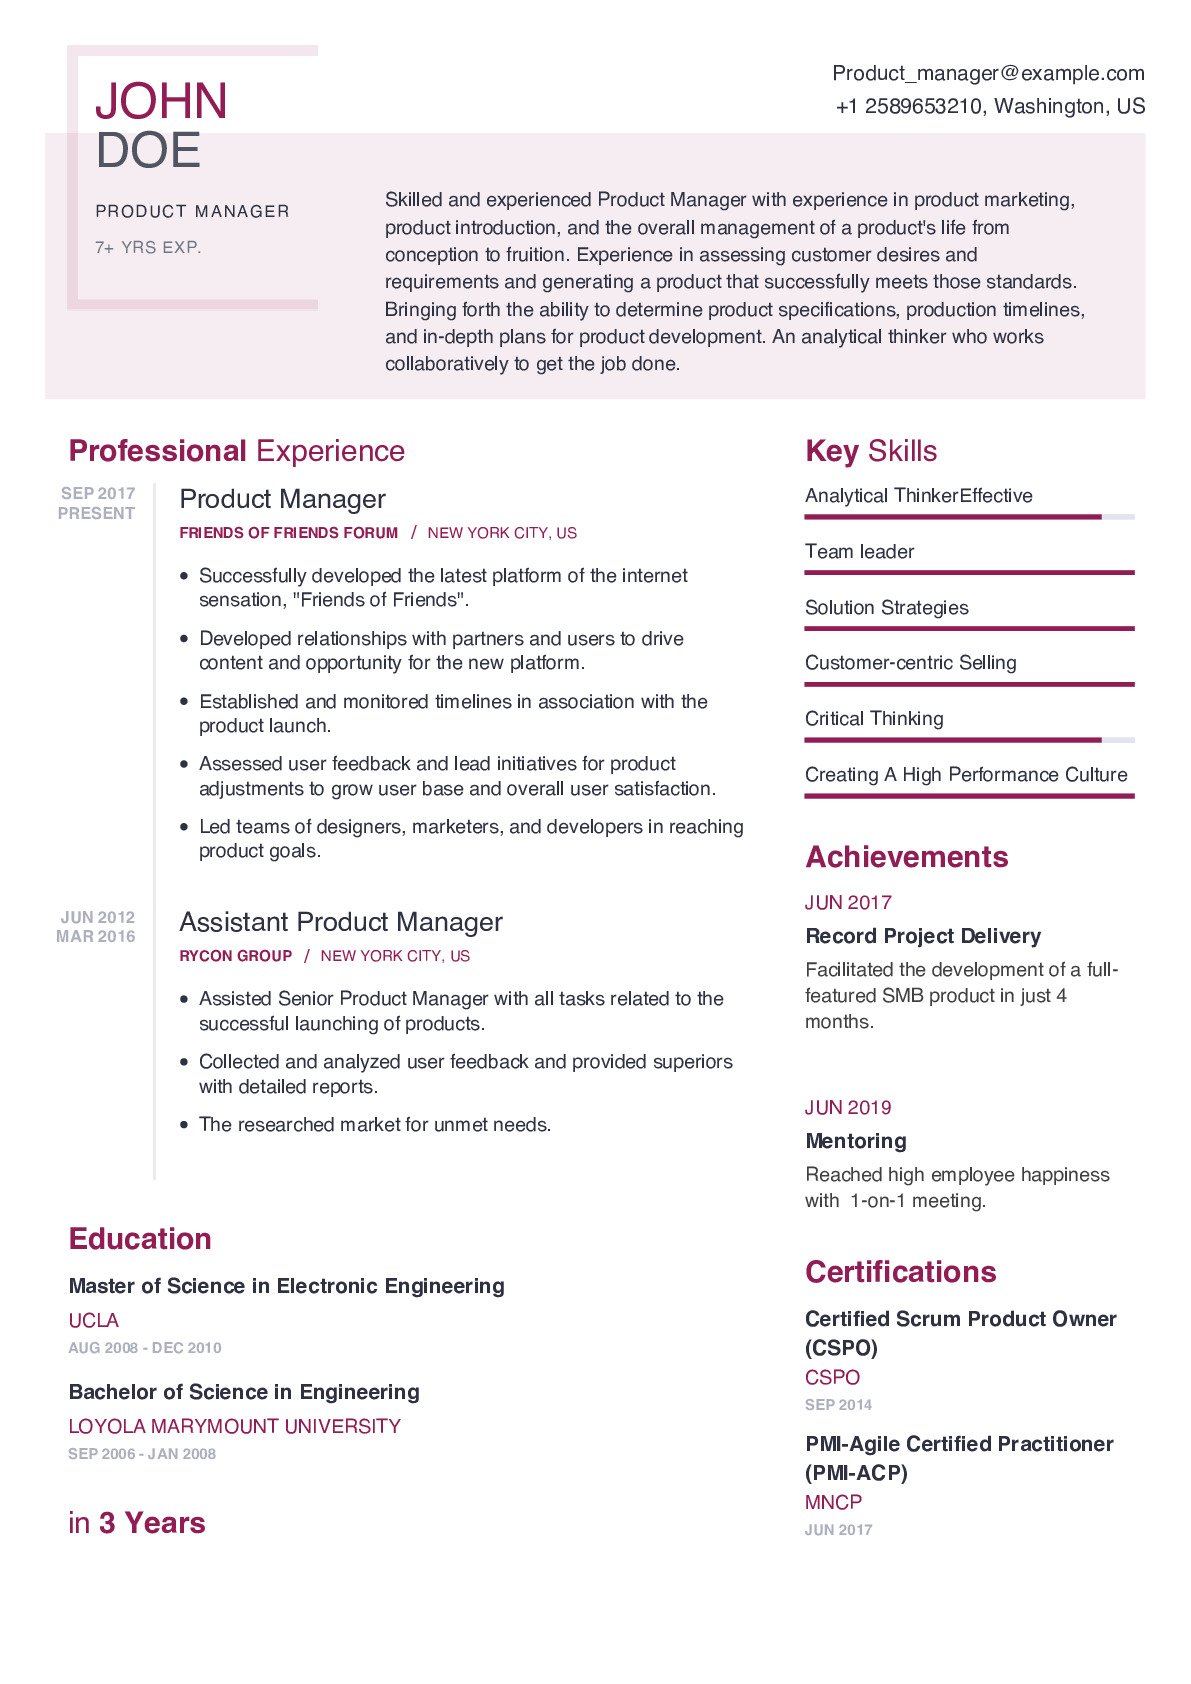 Product Manager Resume Example With Content Sample